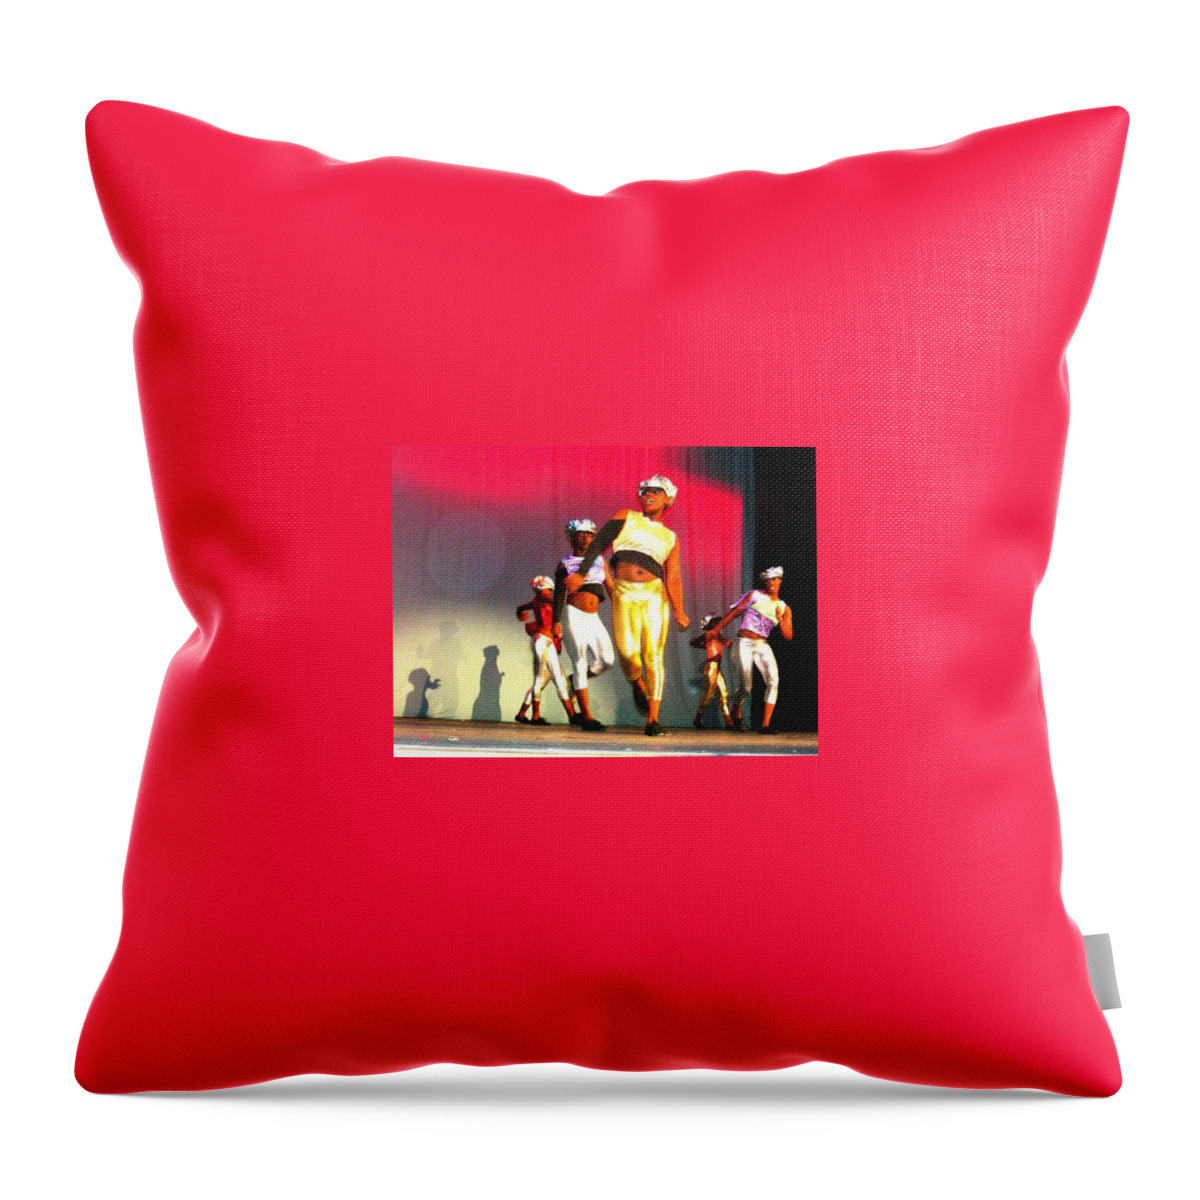  Throw Pillow featuring the painting Ecsapee by Trevor A Smith